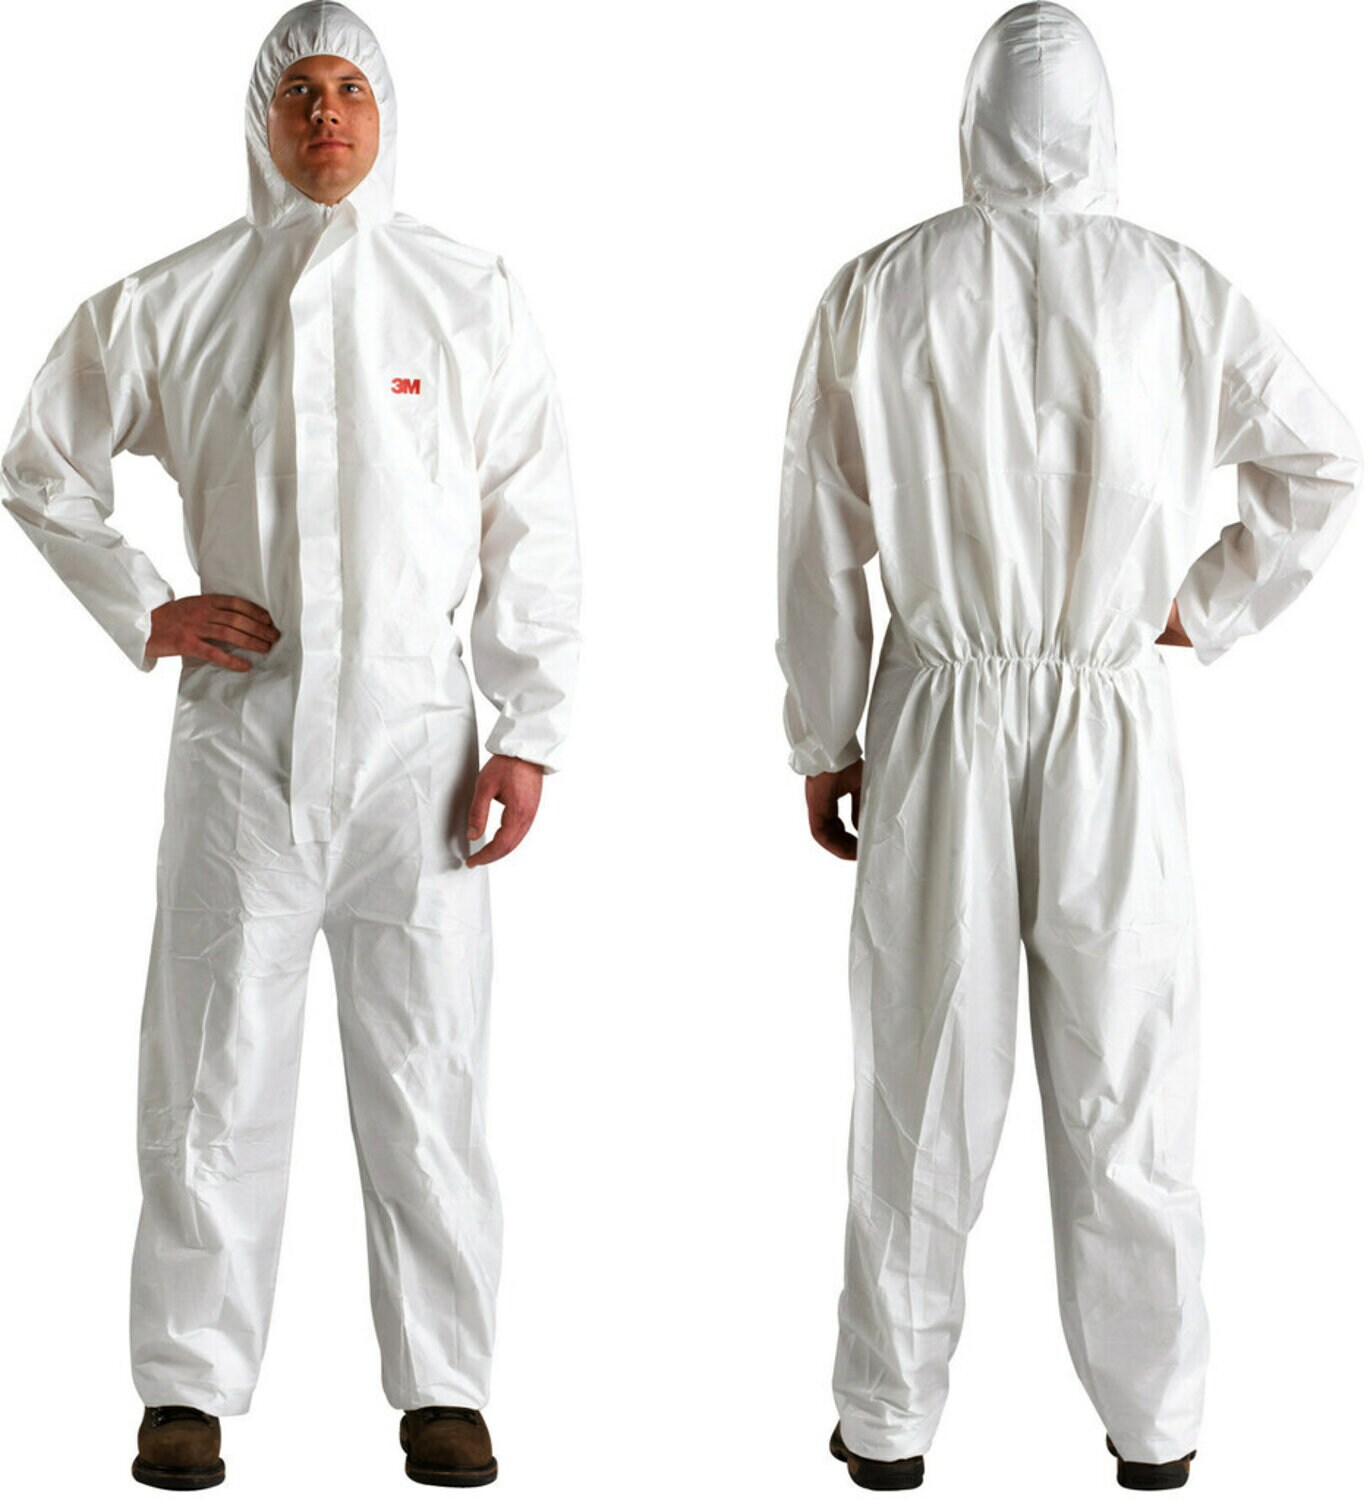 7000089665 - 3M Disposable Protective Coverall 4510-XXL White Type 5/6 SI, 20 ea/Case